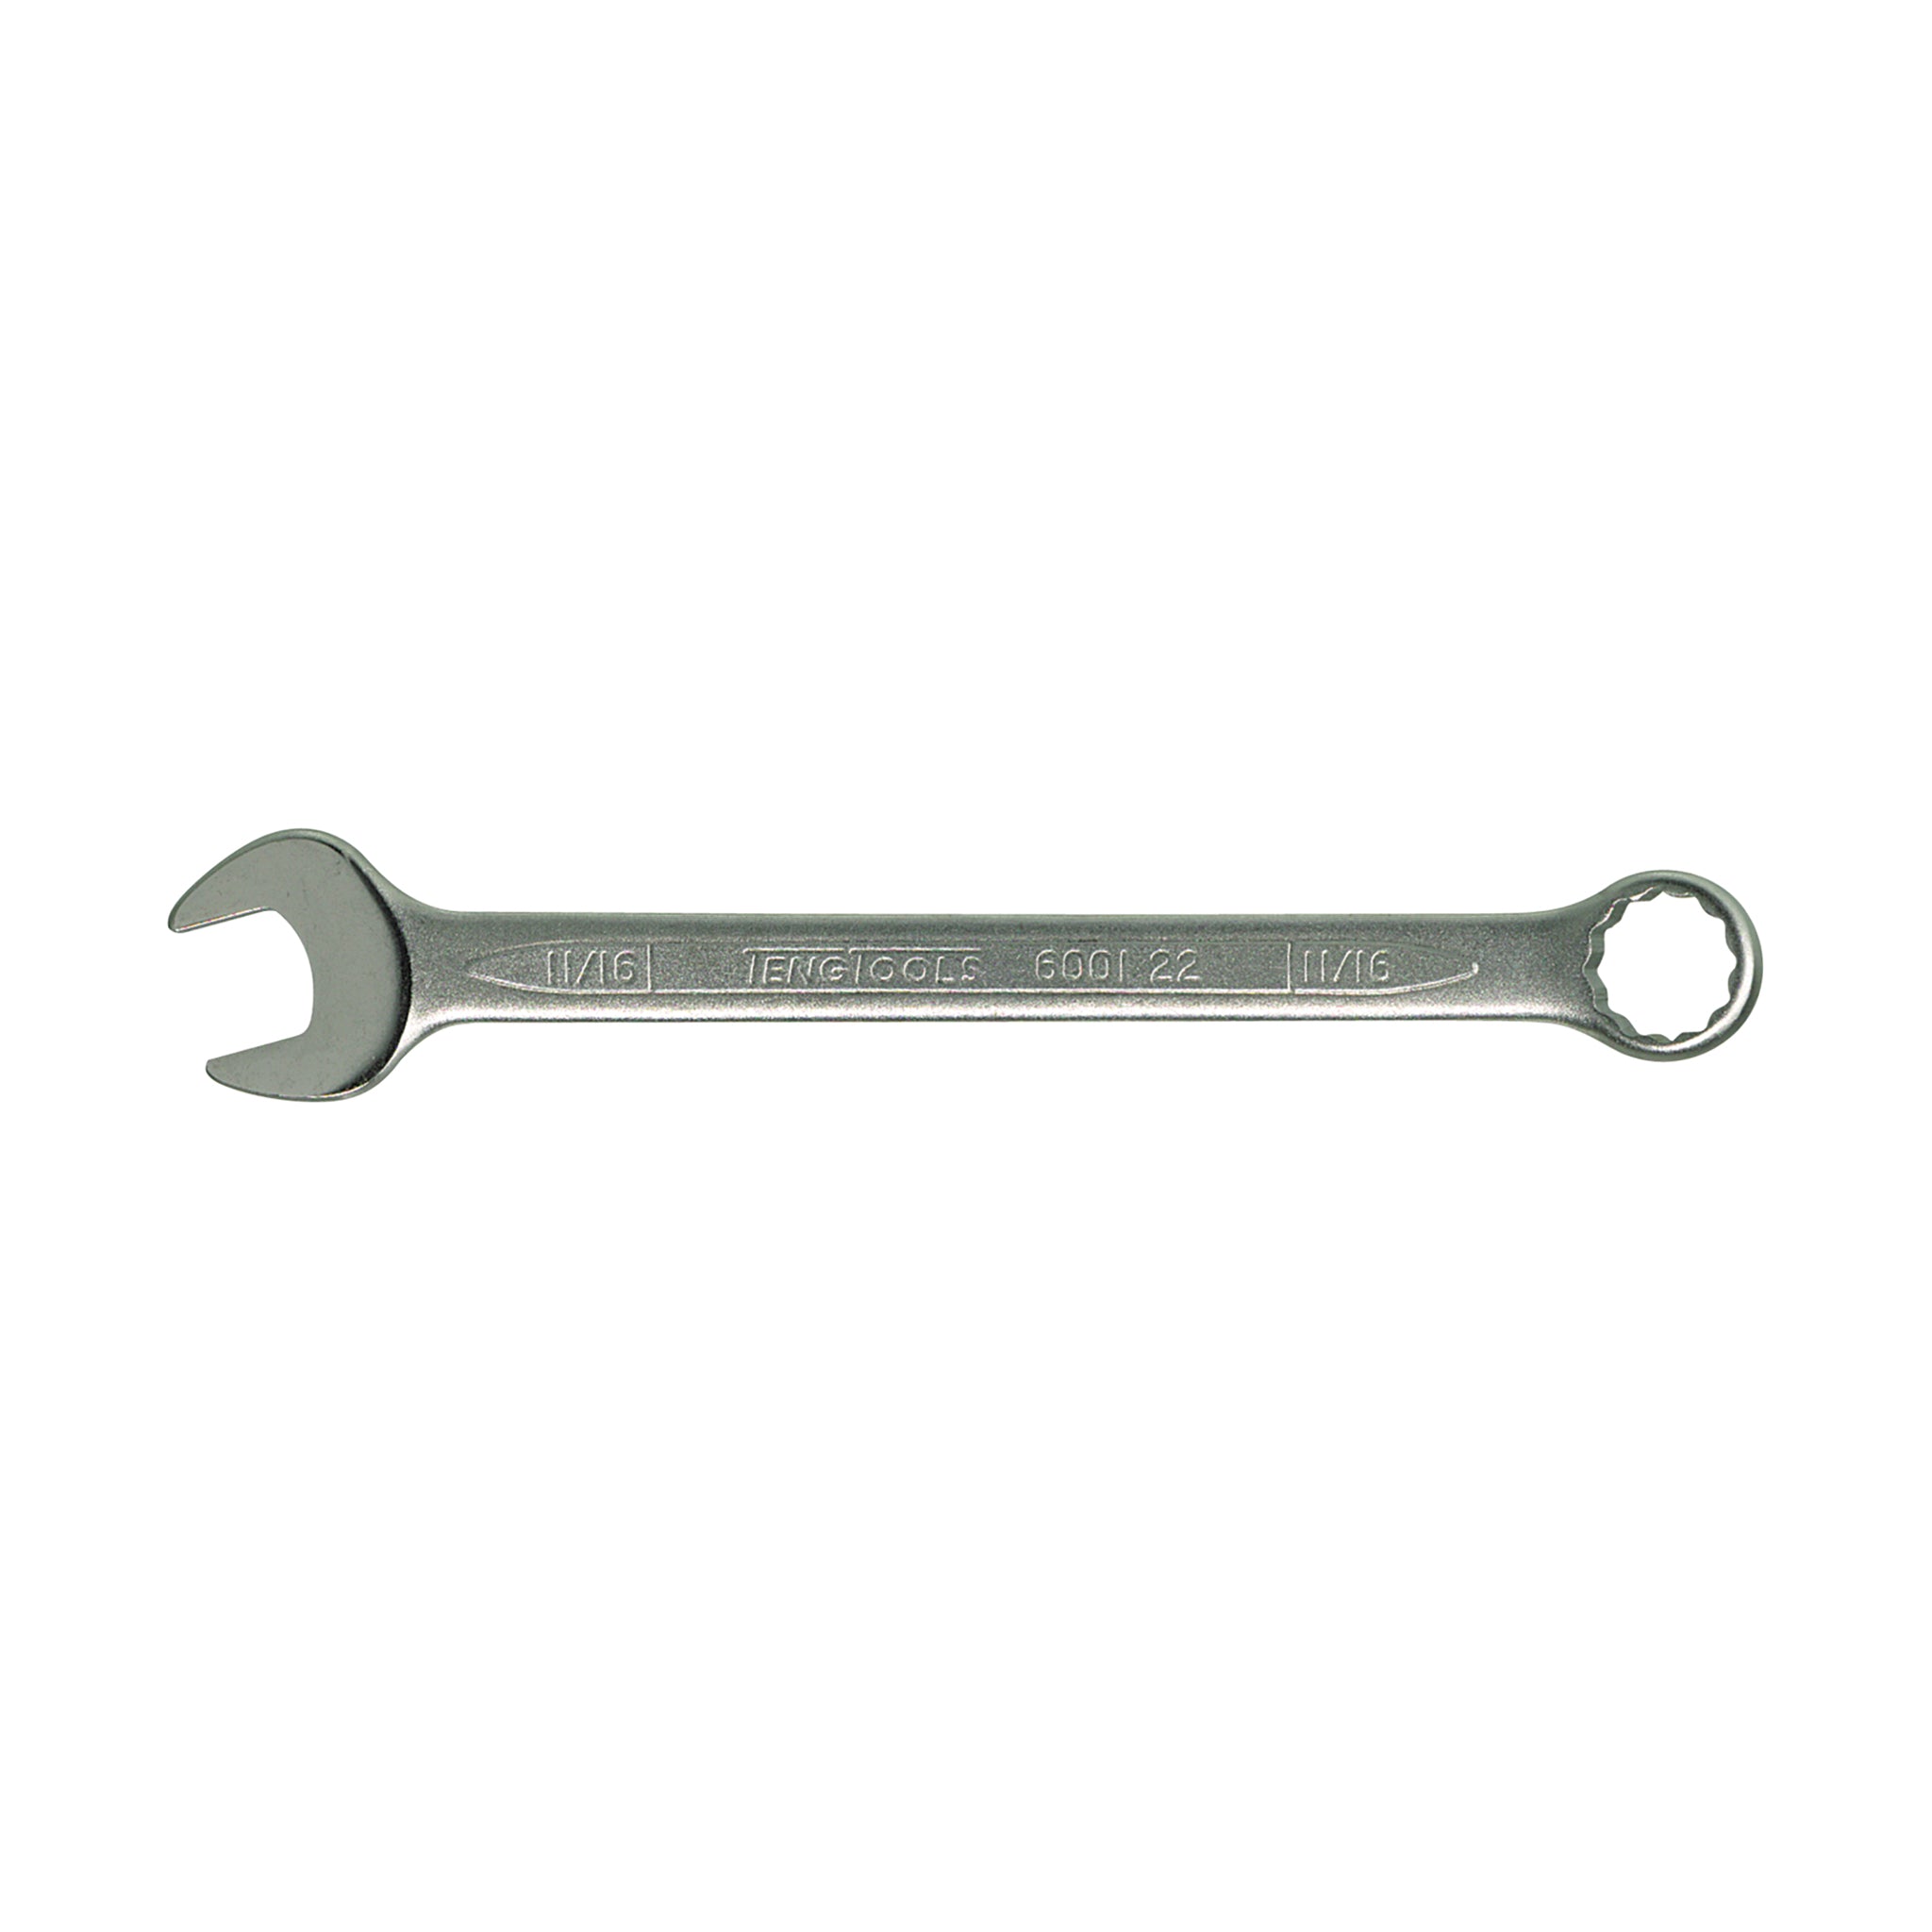 Standard Combination SAE Wrenches Made With Chrome Vanadium Steel - 1